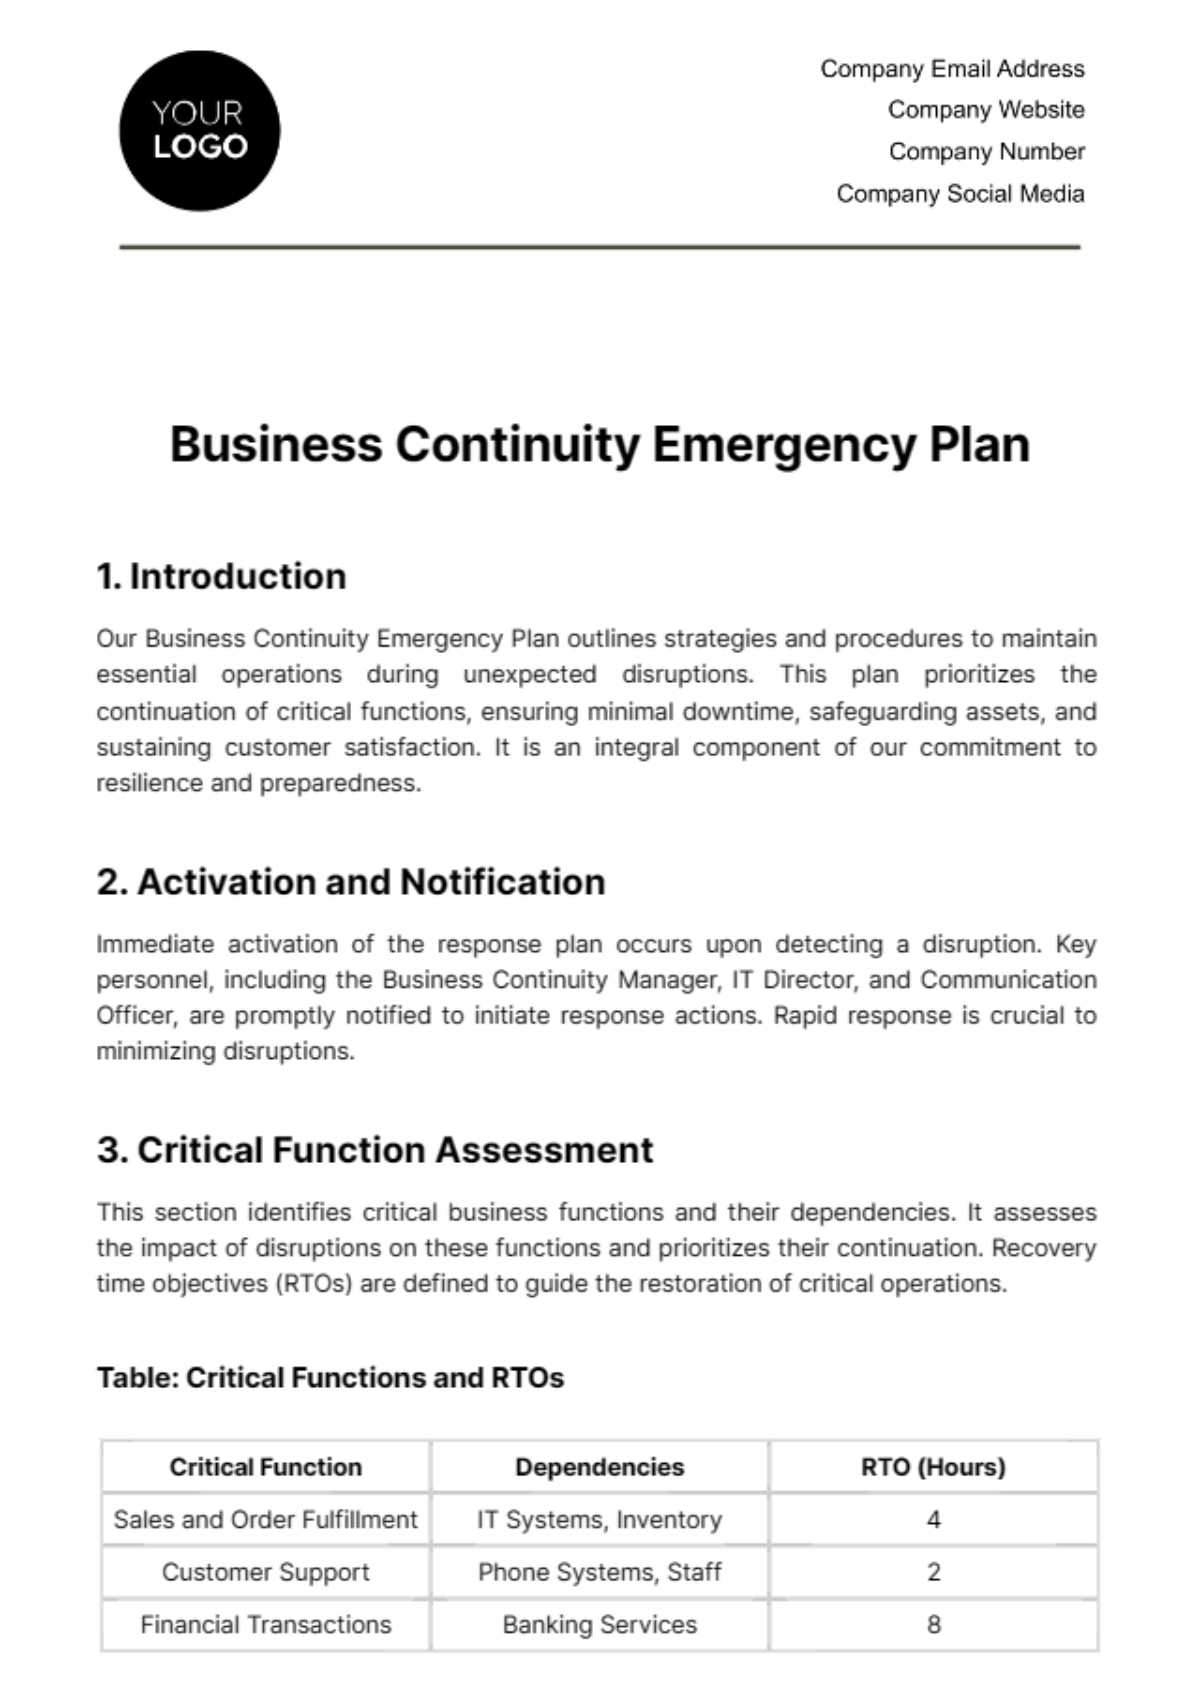 Business Continuity Emergency Plan Template